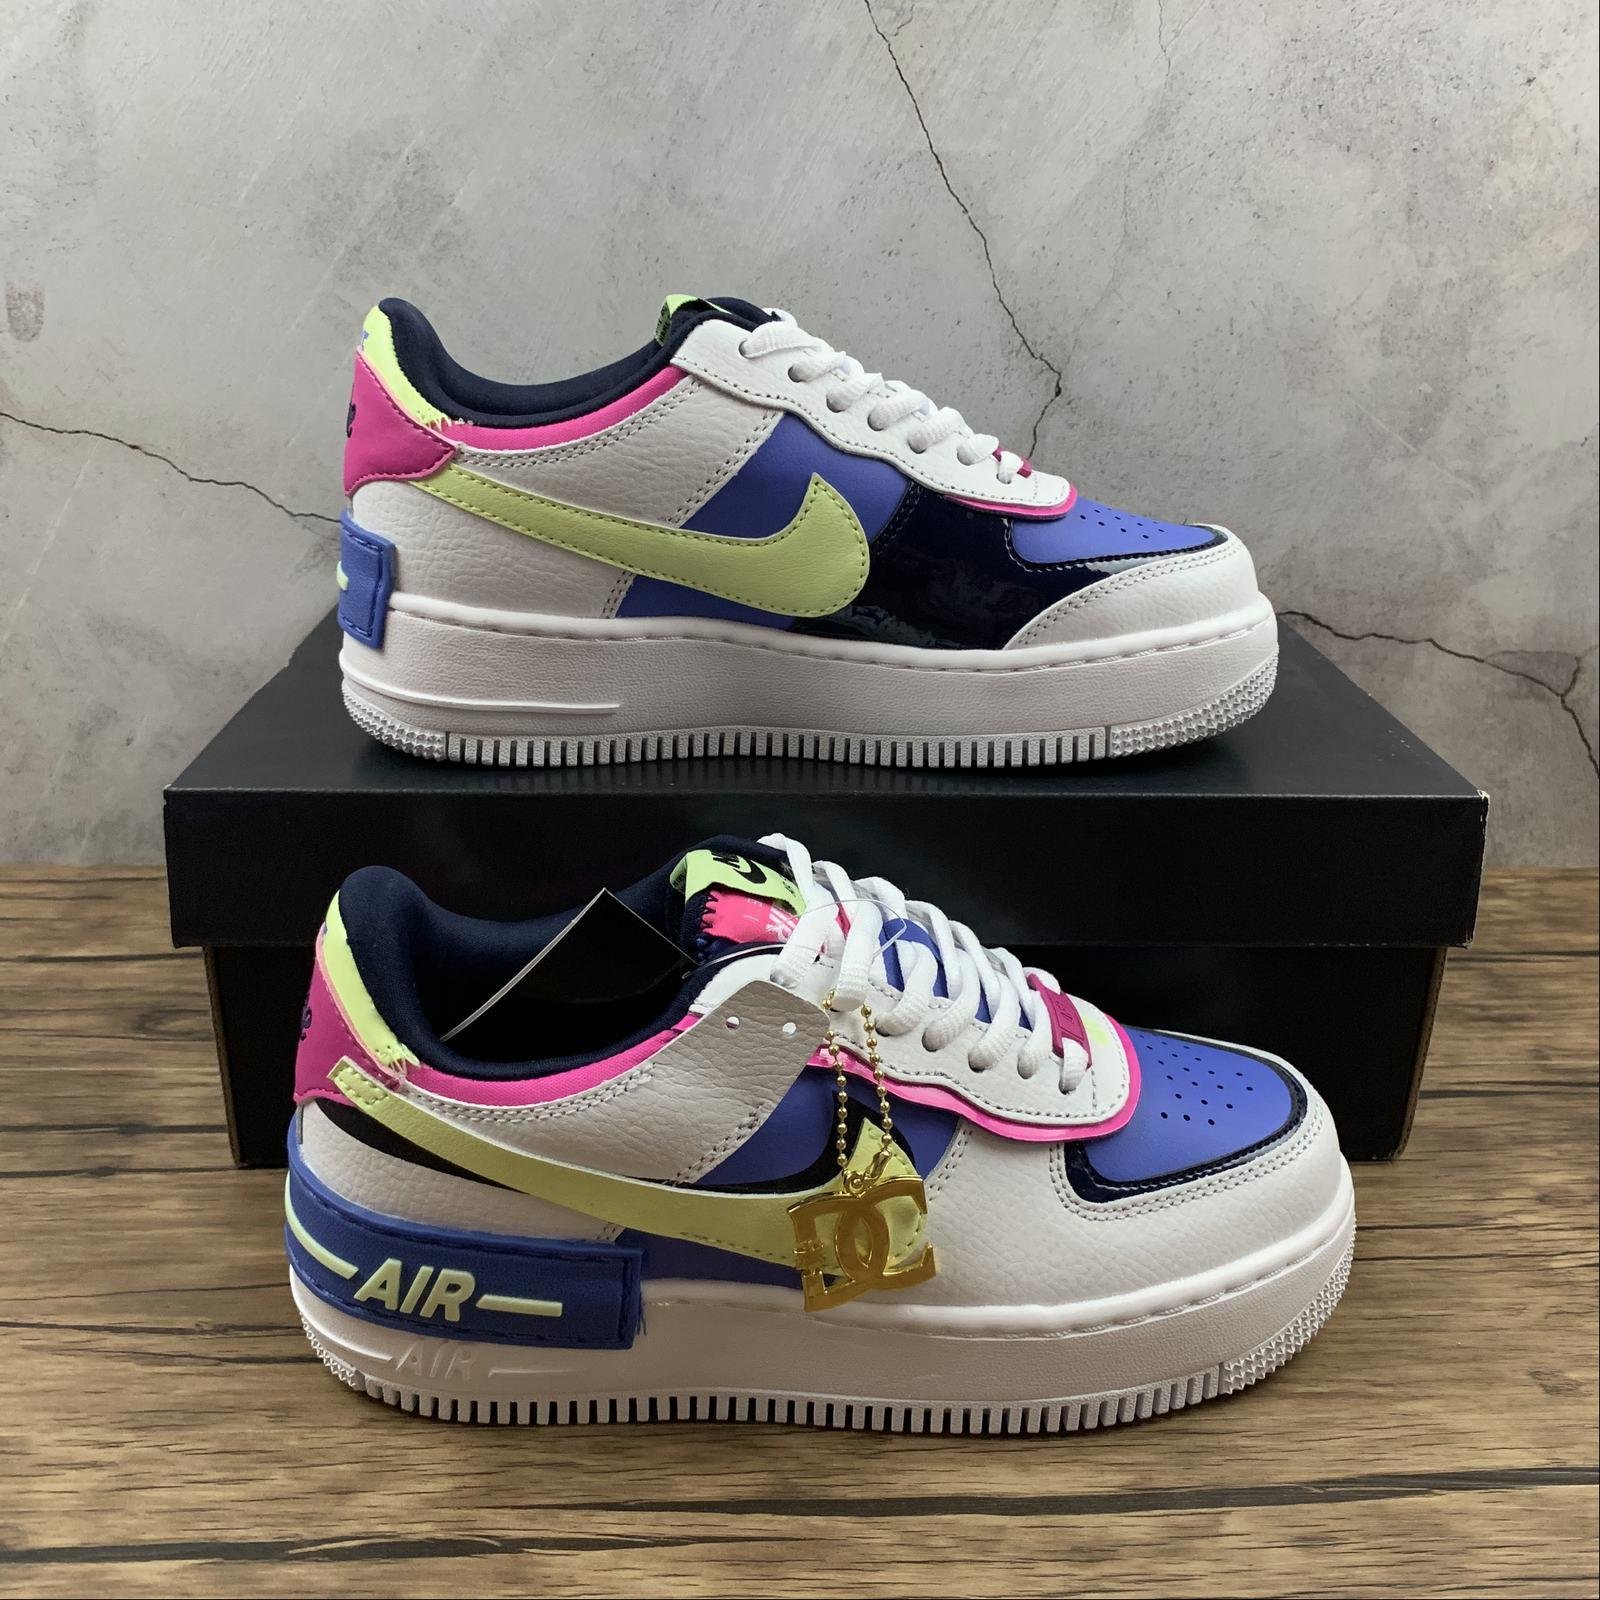 New      Air Force 1         Clot PSG Pairs Shadow Travis Scott AF1 Sport Shoes